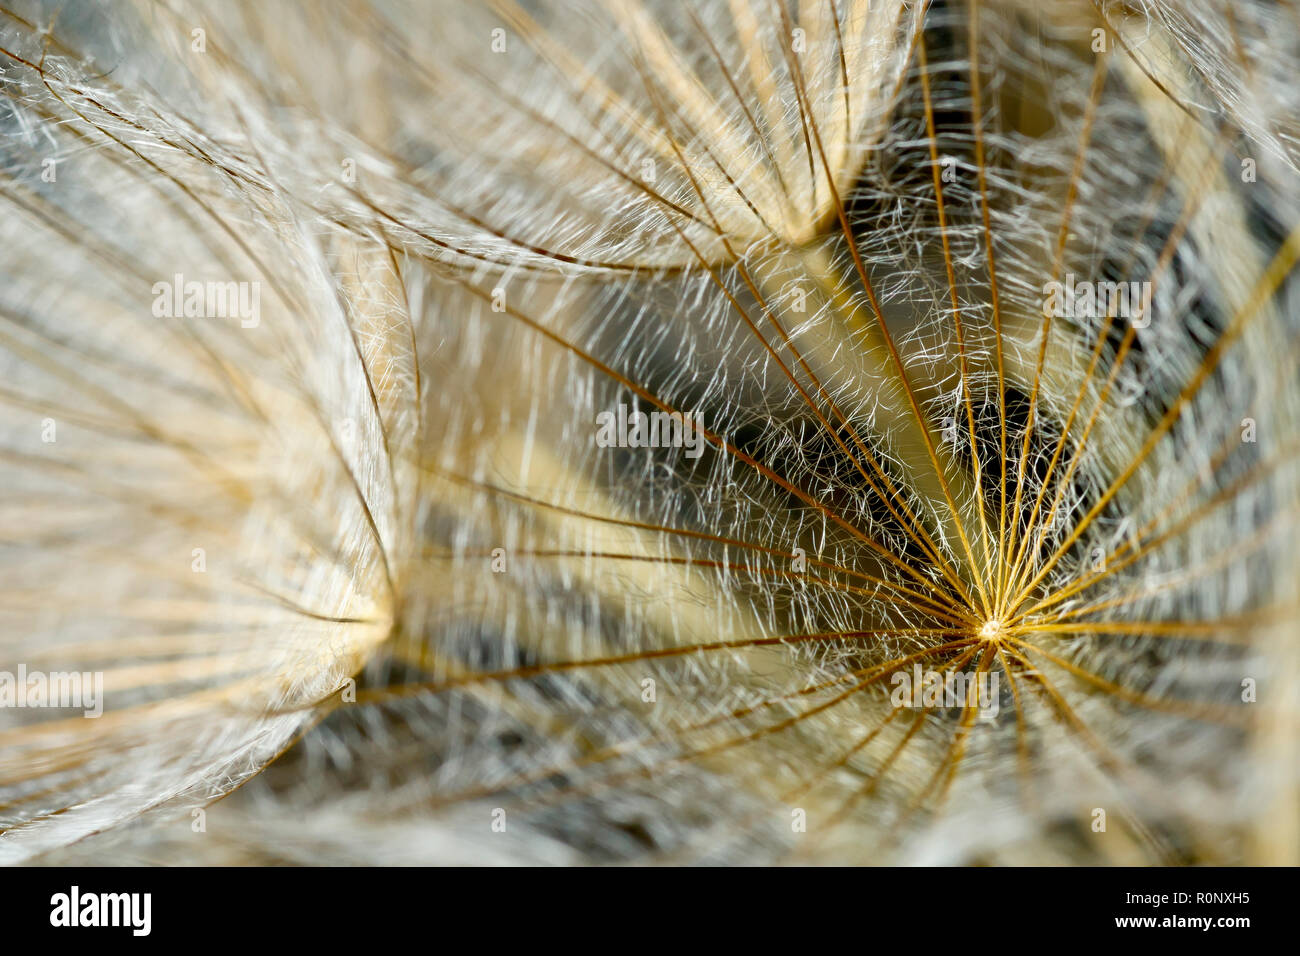 Goatsbeard or Goat's-beard (tragopogon pratensis), or Jack-go-to-bed-at-noon, a close up abstract of part of the large feathery seedhead. Stock Photo